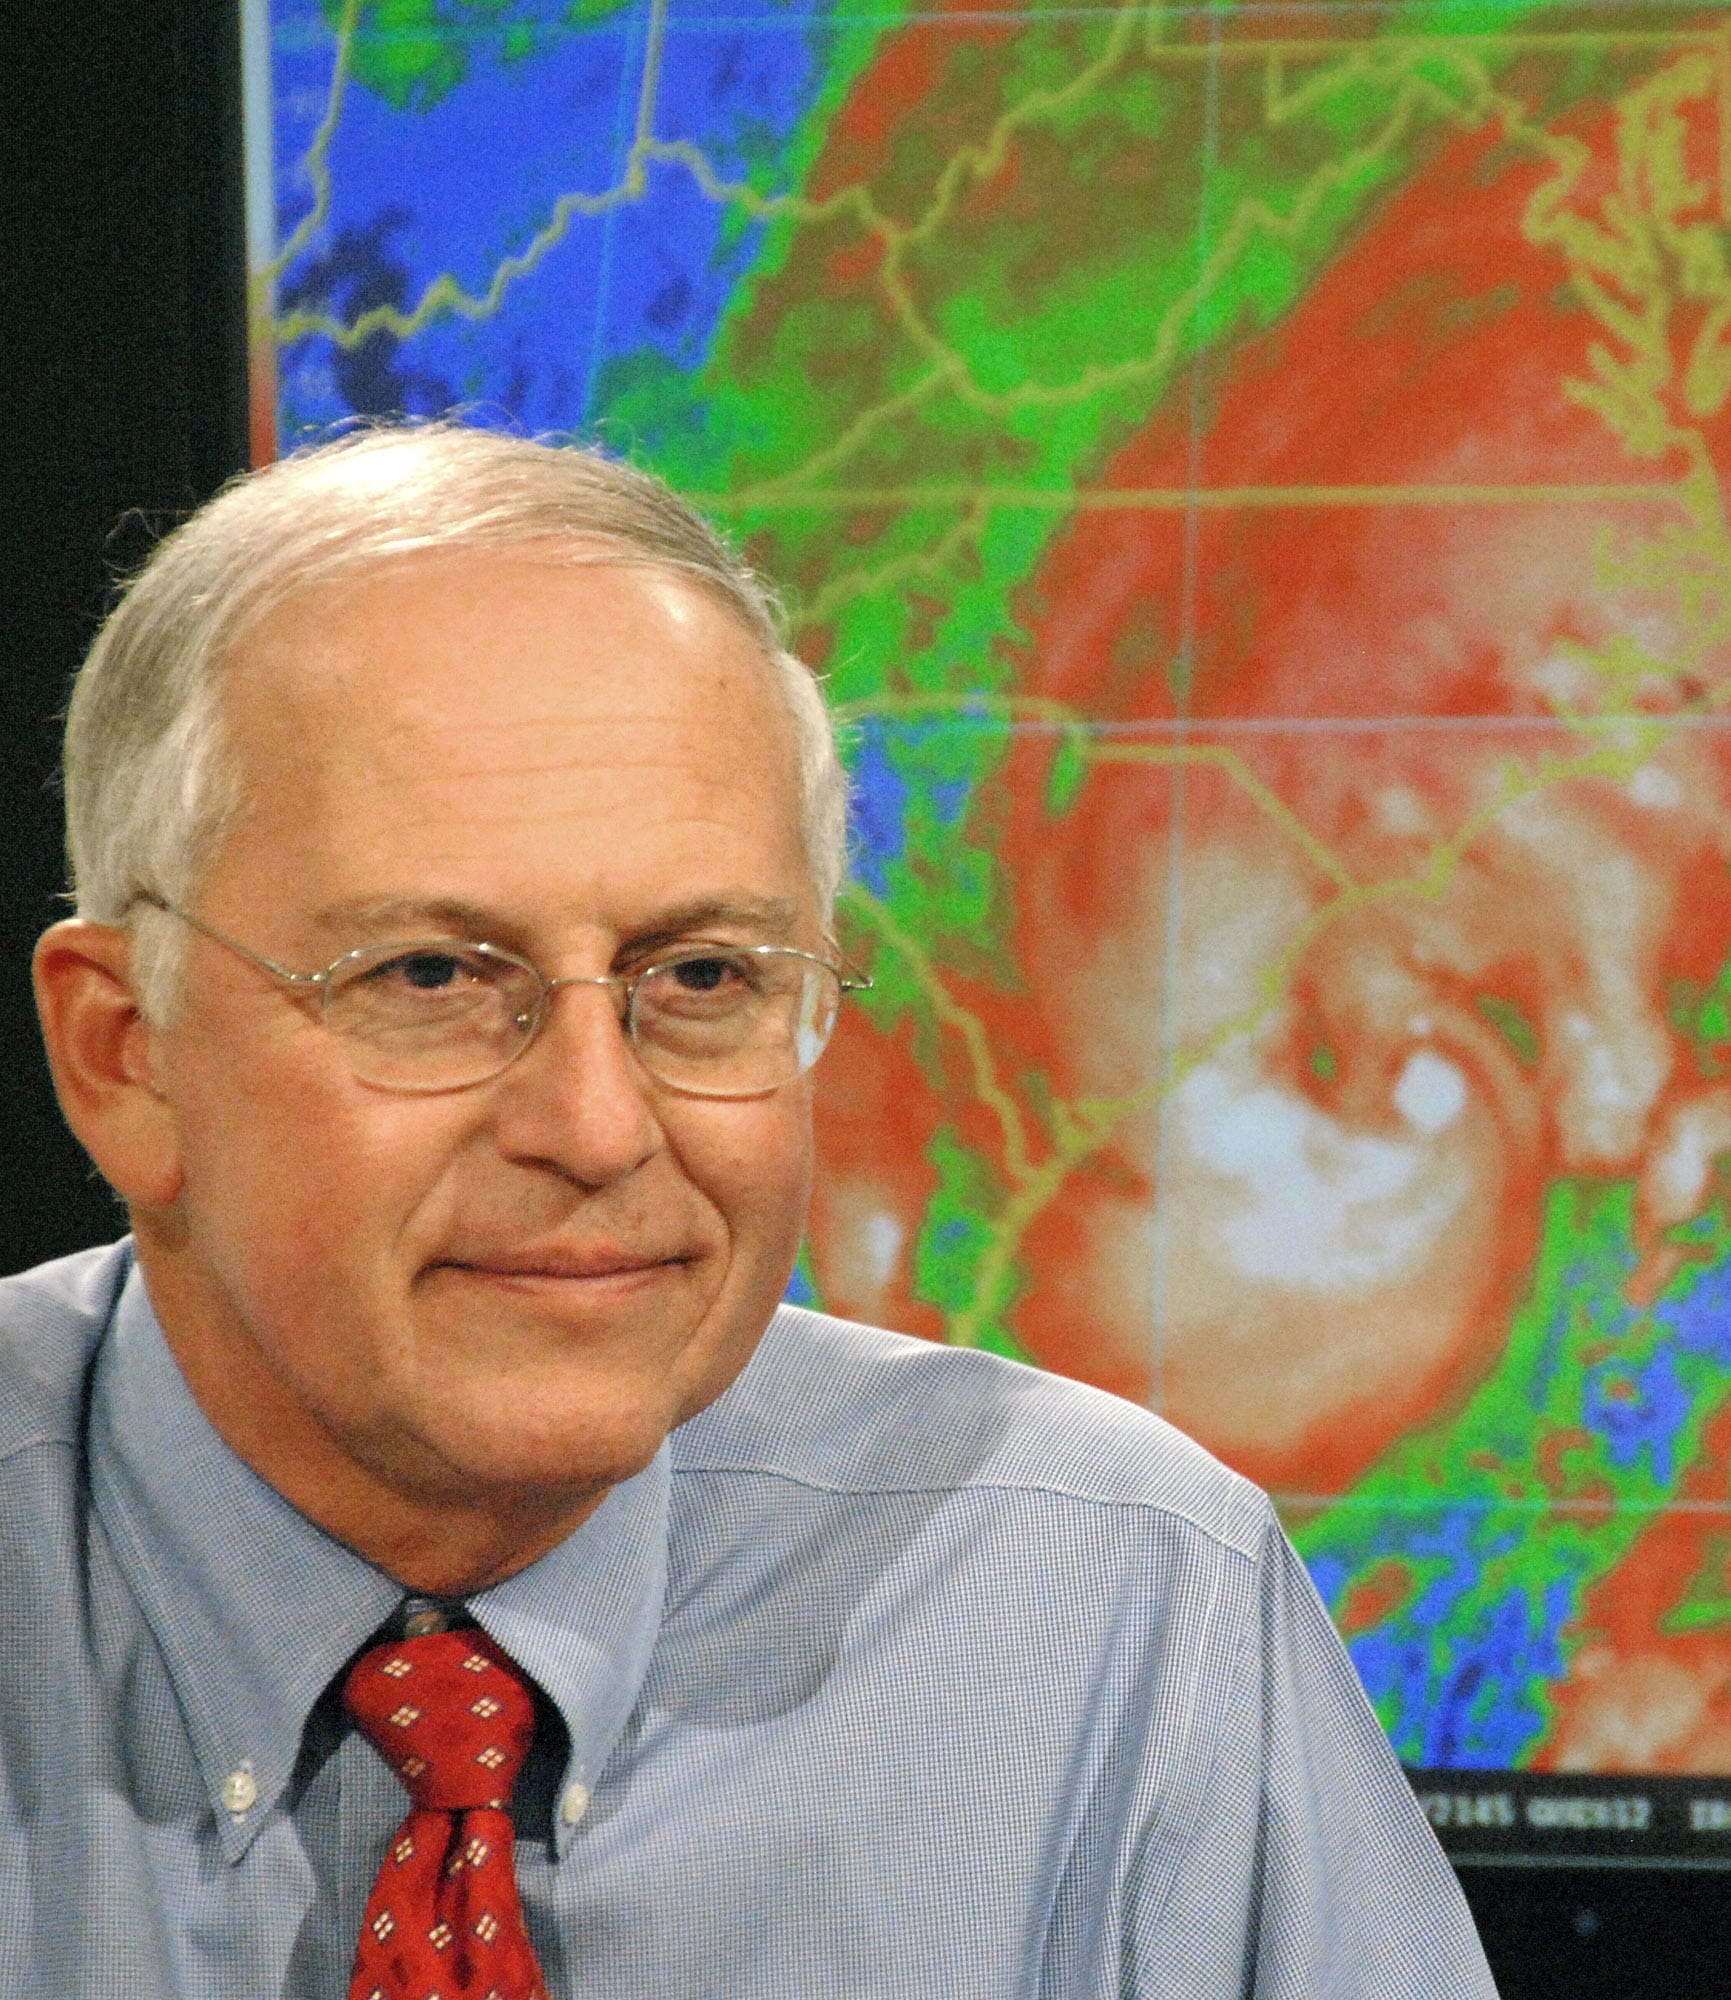 ational Hurricane Center director Max Mayfield briefs a Charleston, S.C., television audience on the progress of Tropical Storm Ernesto, at the hurricane center in Miami in 2006.